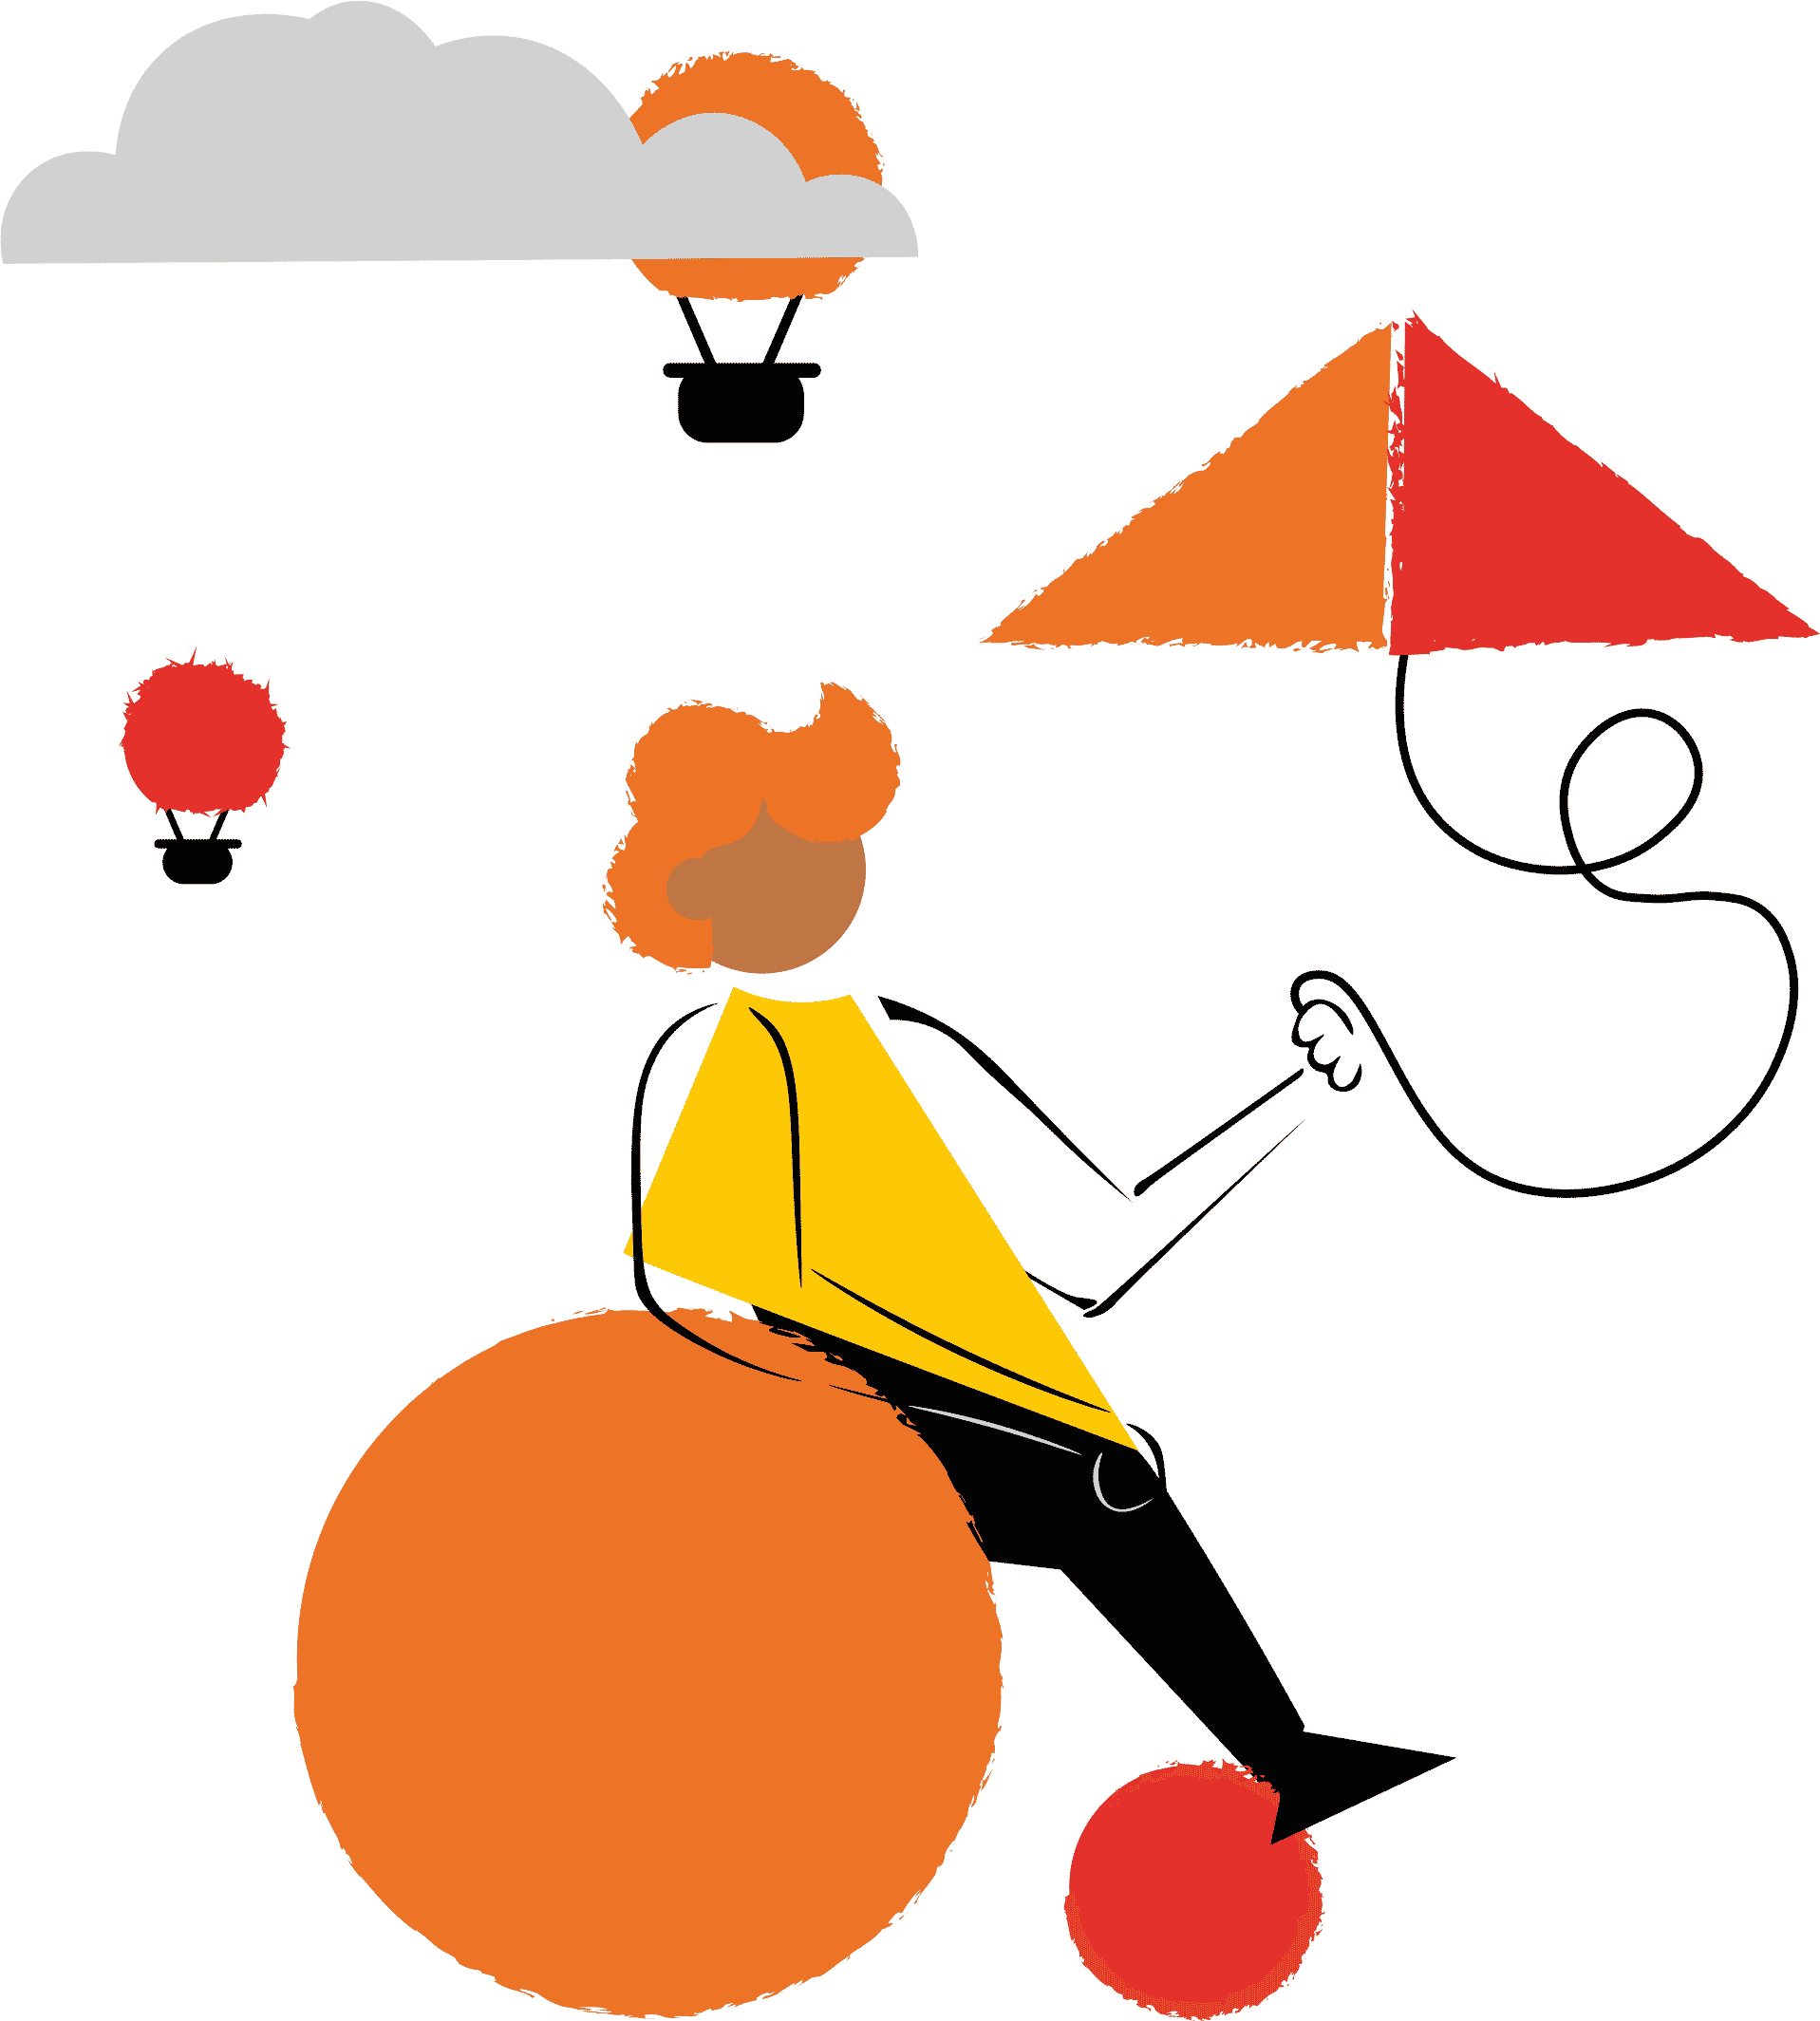 Playful illustration of boy flying a kite with clouds and hot air balloons in the sky